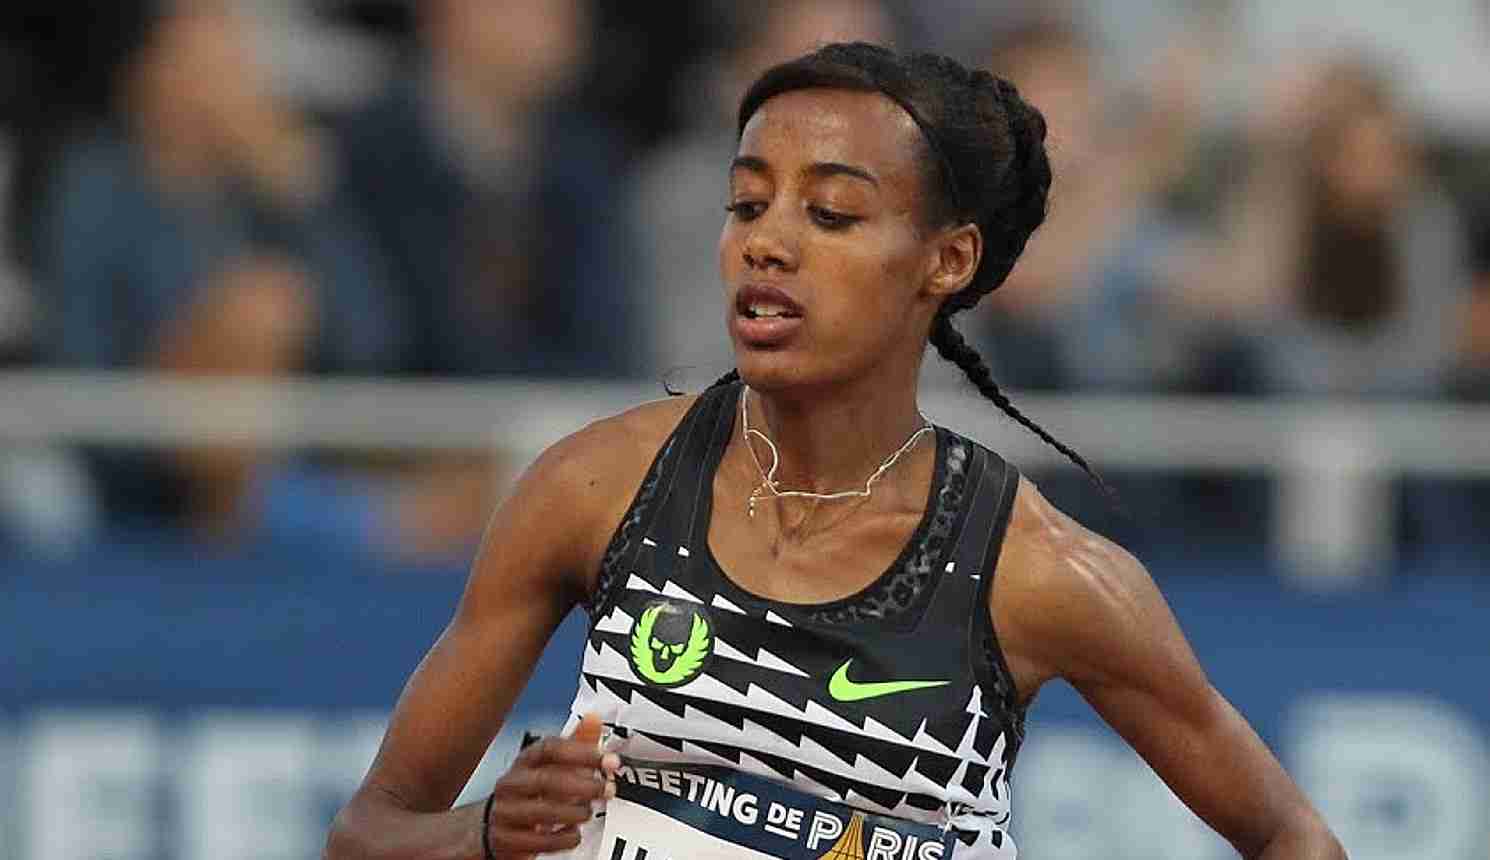 Sifan Hassan in action in the women's 10,000